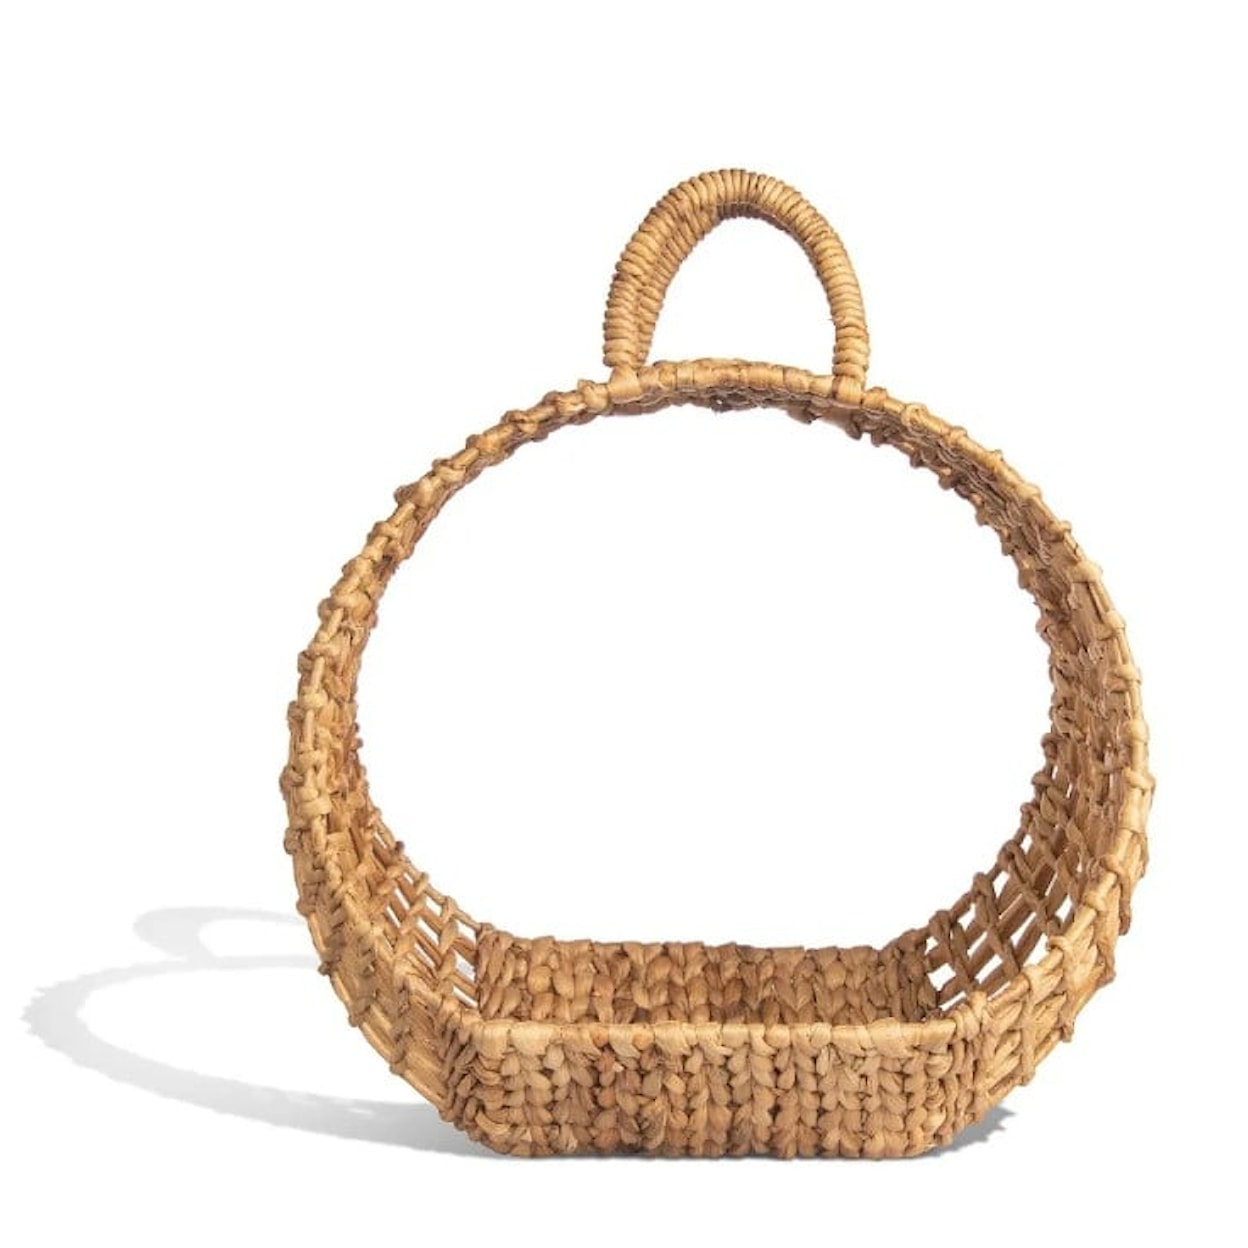 Ibolili Baskets and Sets WOVEN WATER HYACINTH CARRIER BASKET